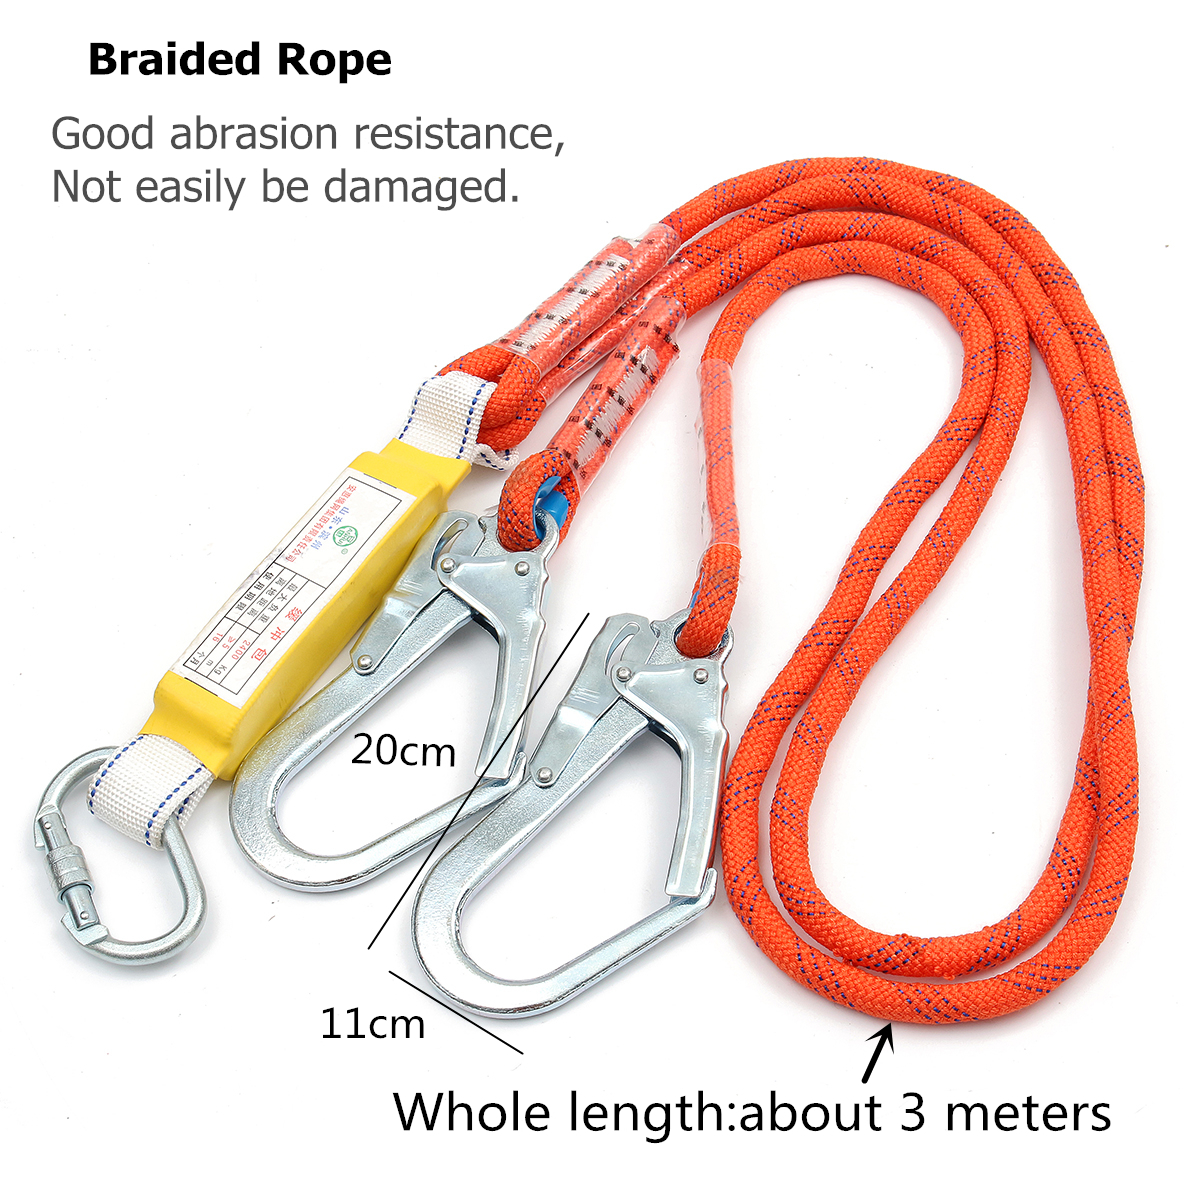 Professional Climbing Rappelling Rescue Full Body Safety Belt Harness US Ship for sale online 